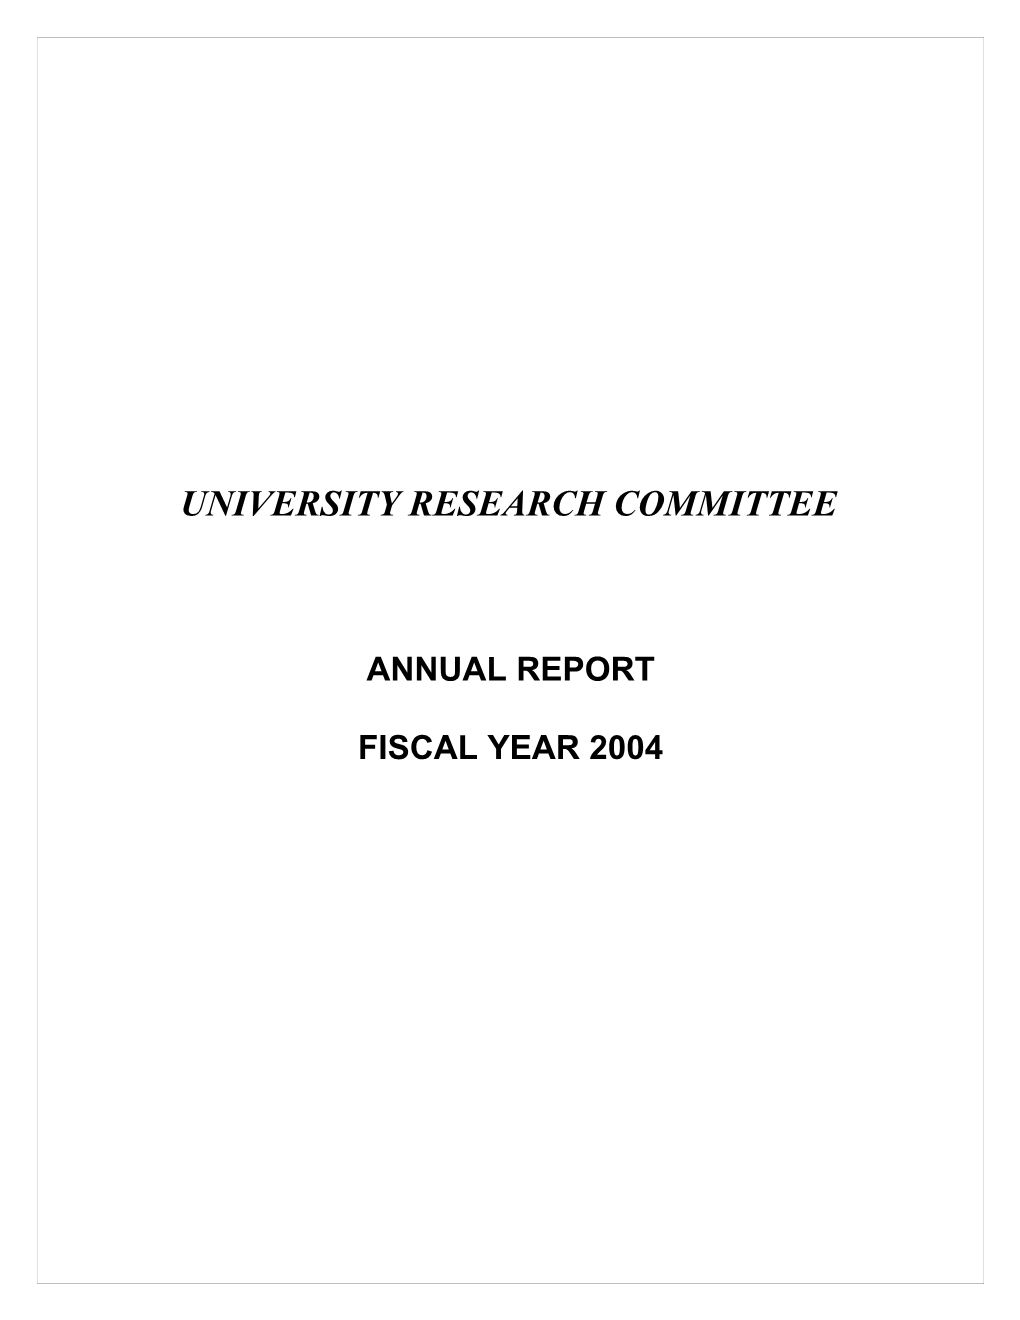 University Research Committee